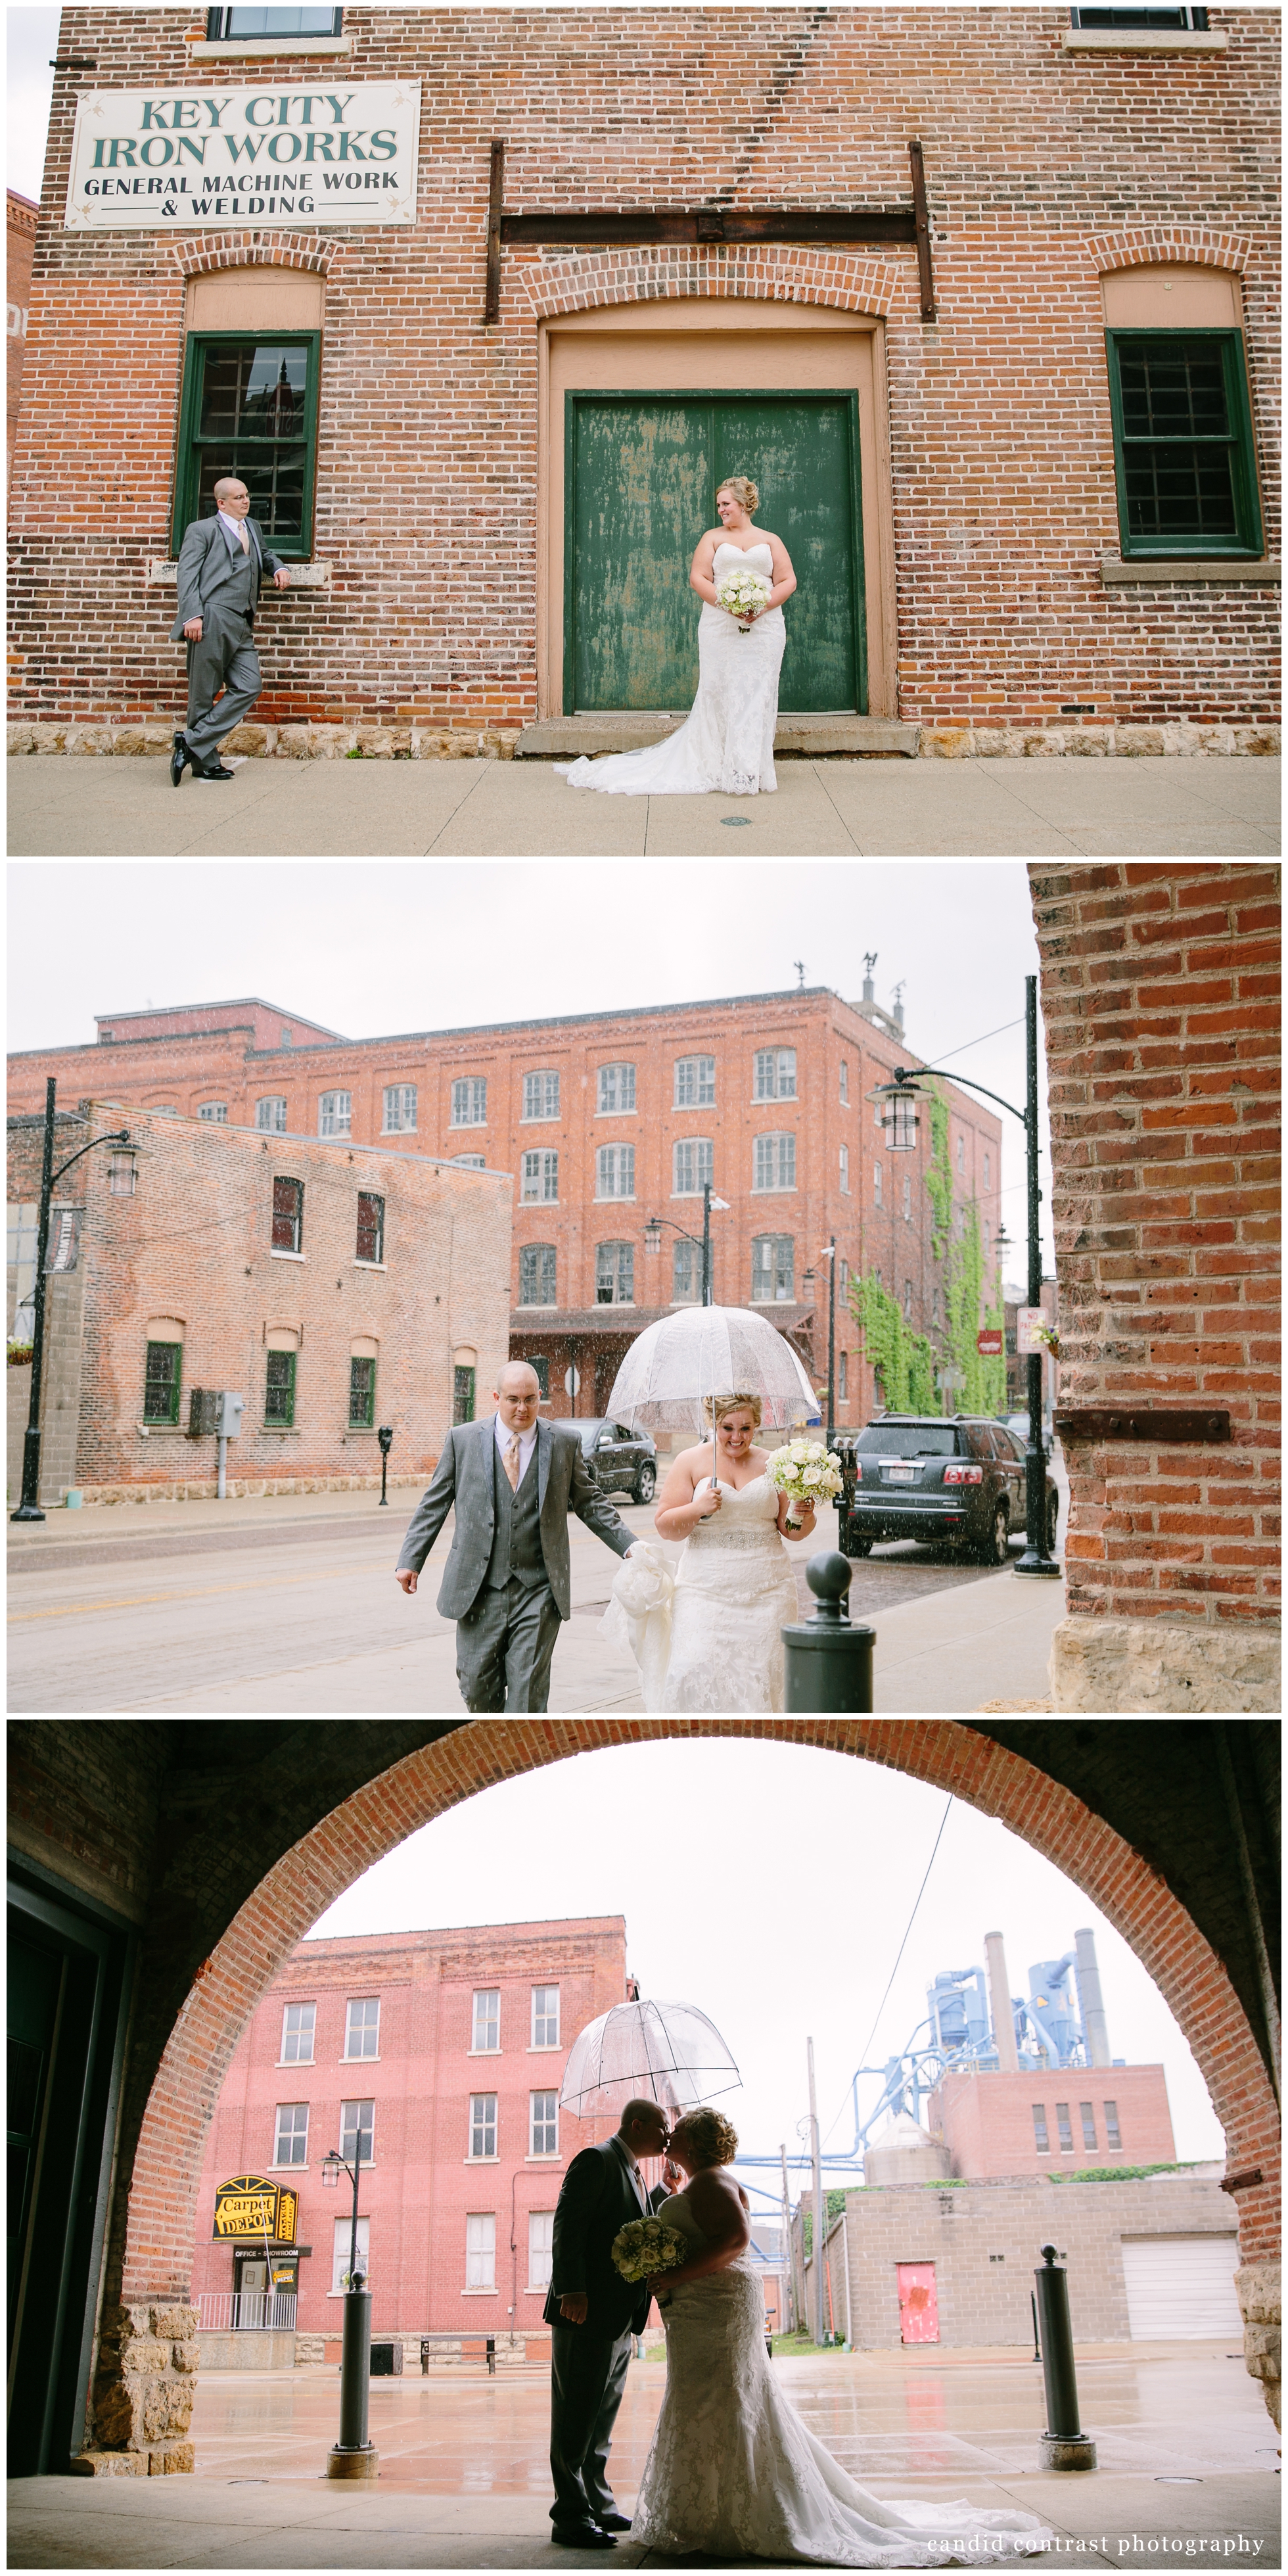 bride and groom portraits during Dubuque IA wedding, candid contrast photography